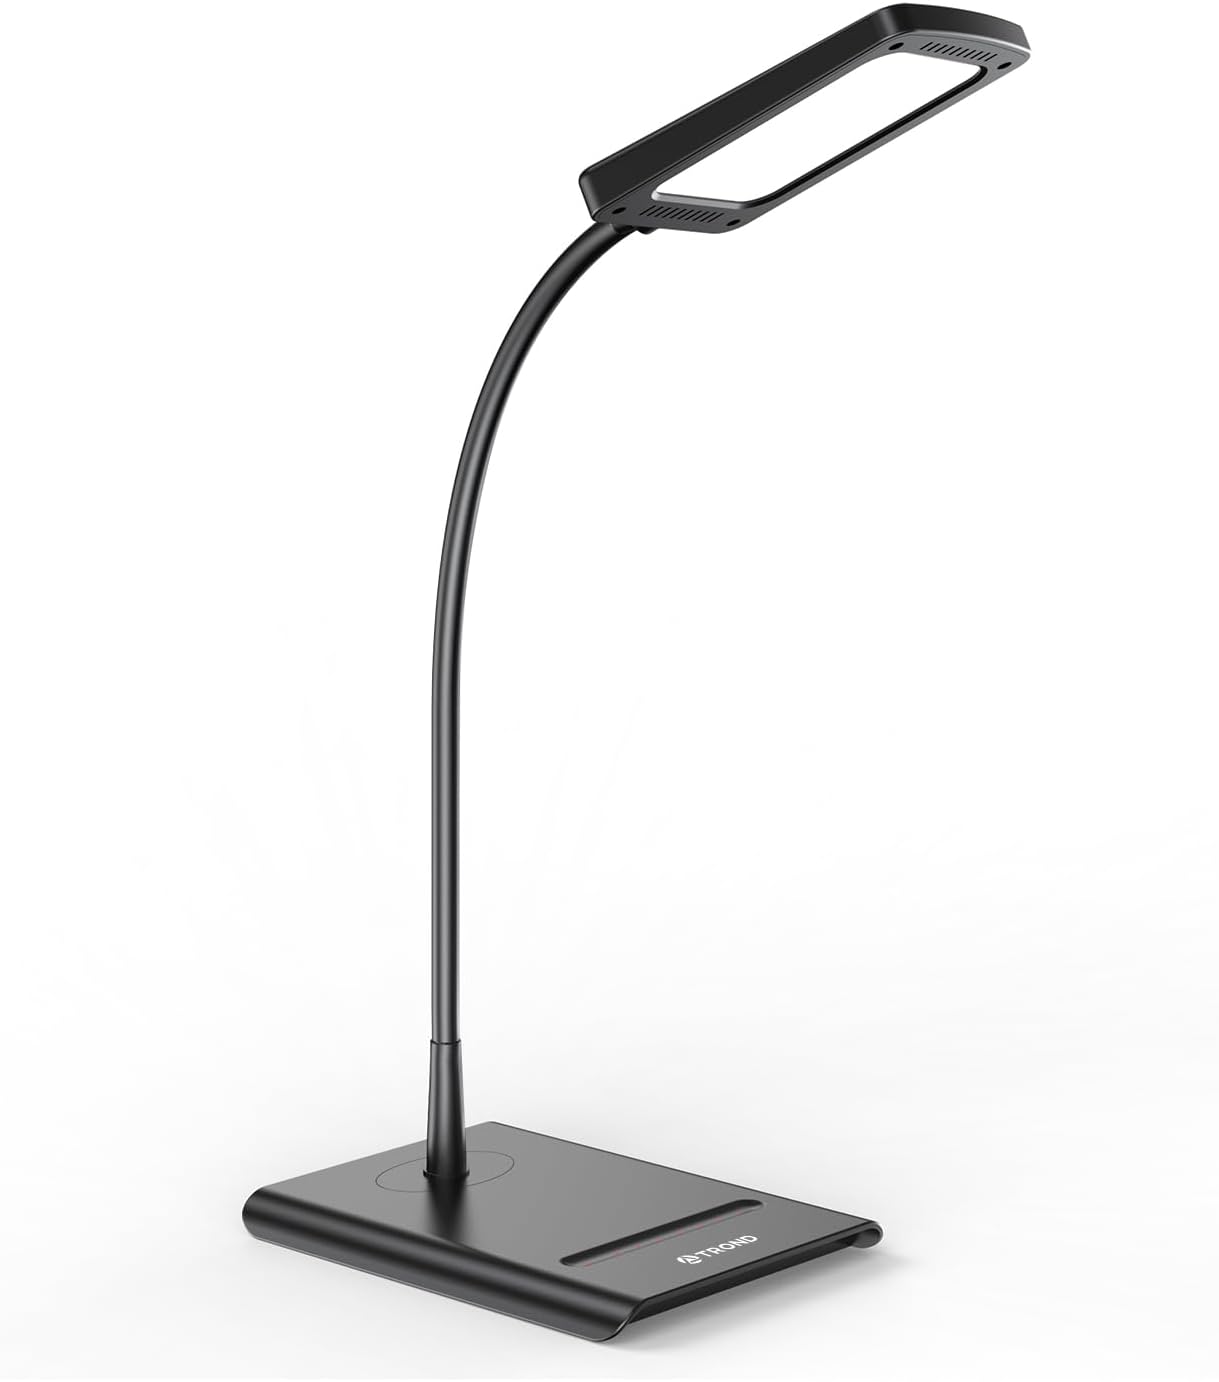 TROND Desk Lamp, Bright Dimmable Eye-Caring Table Lamp, 3 Color Modes 7 Brightness Levels, Flexible Gooseneck, Touch Control, Memory Function, Desk Light for Home Office Bedside Task Reading